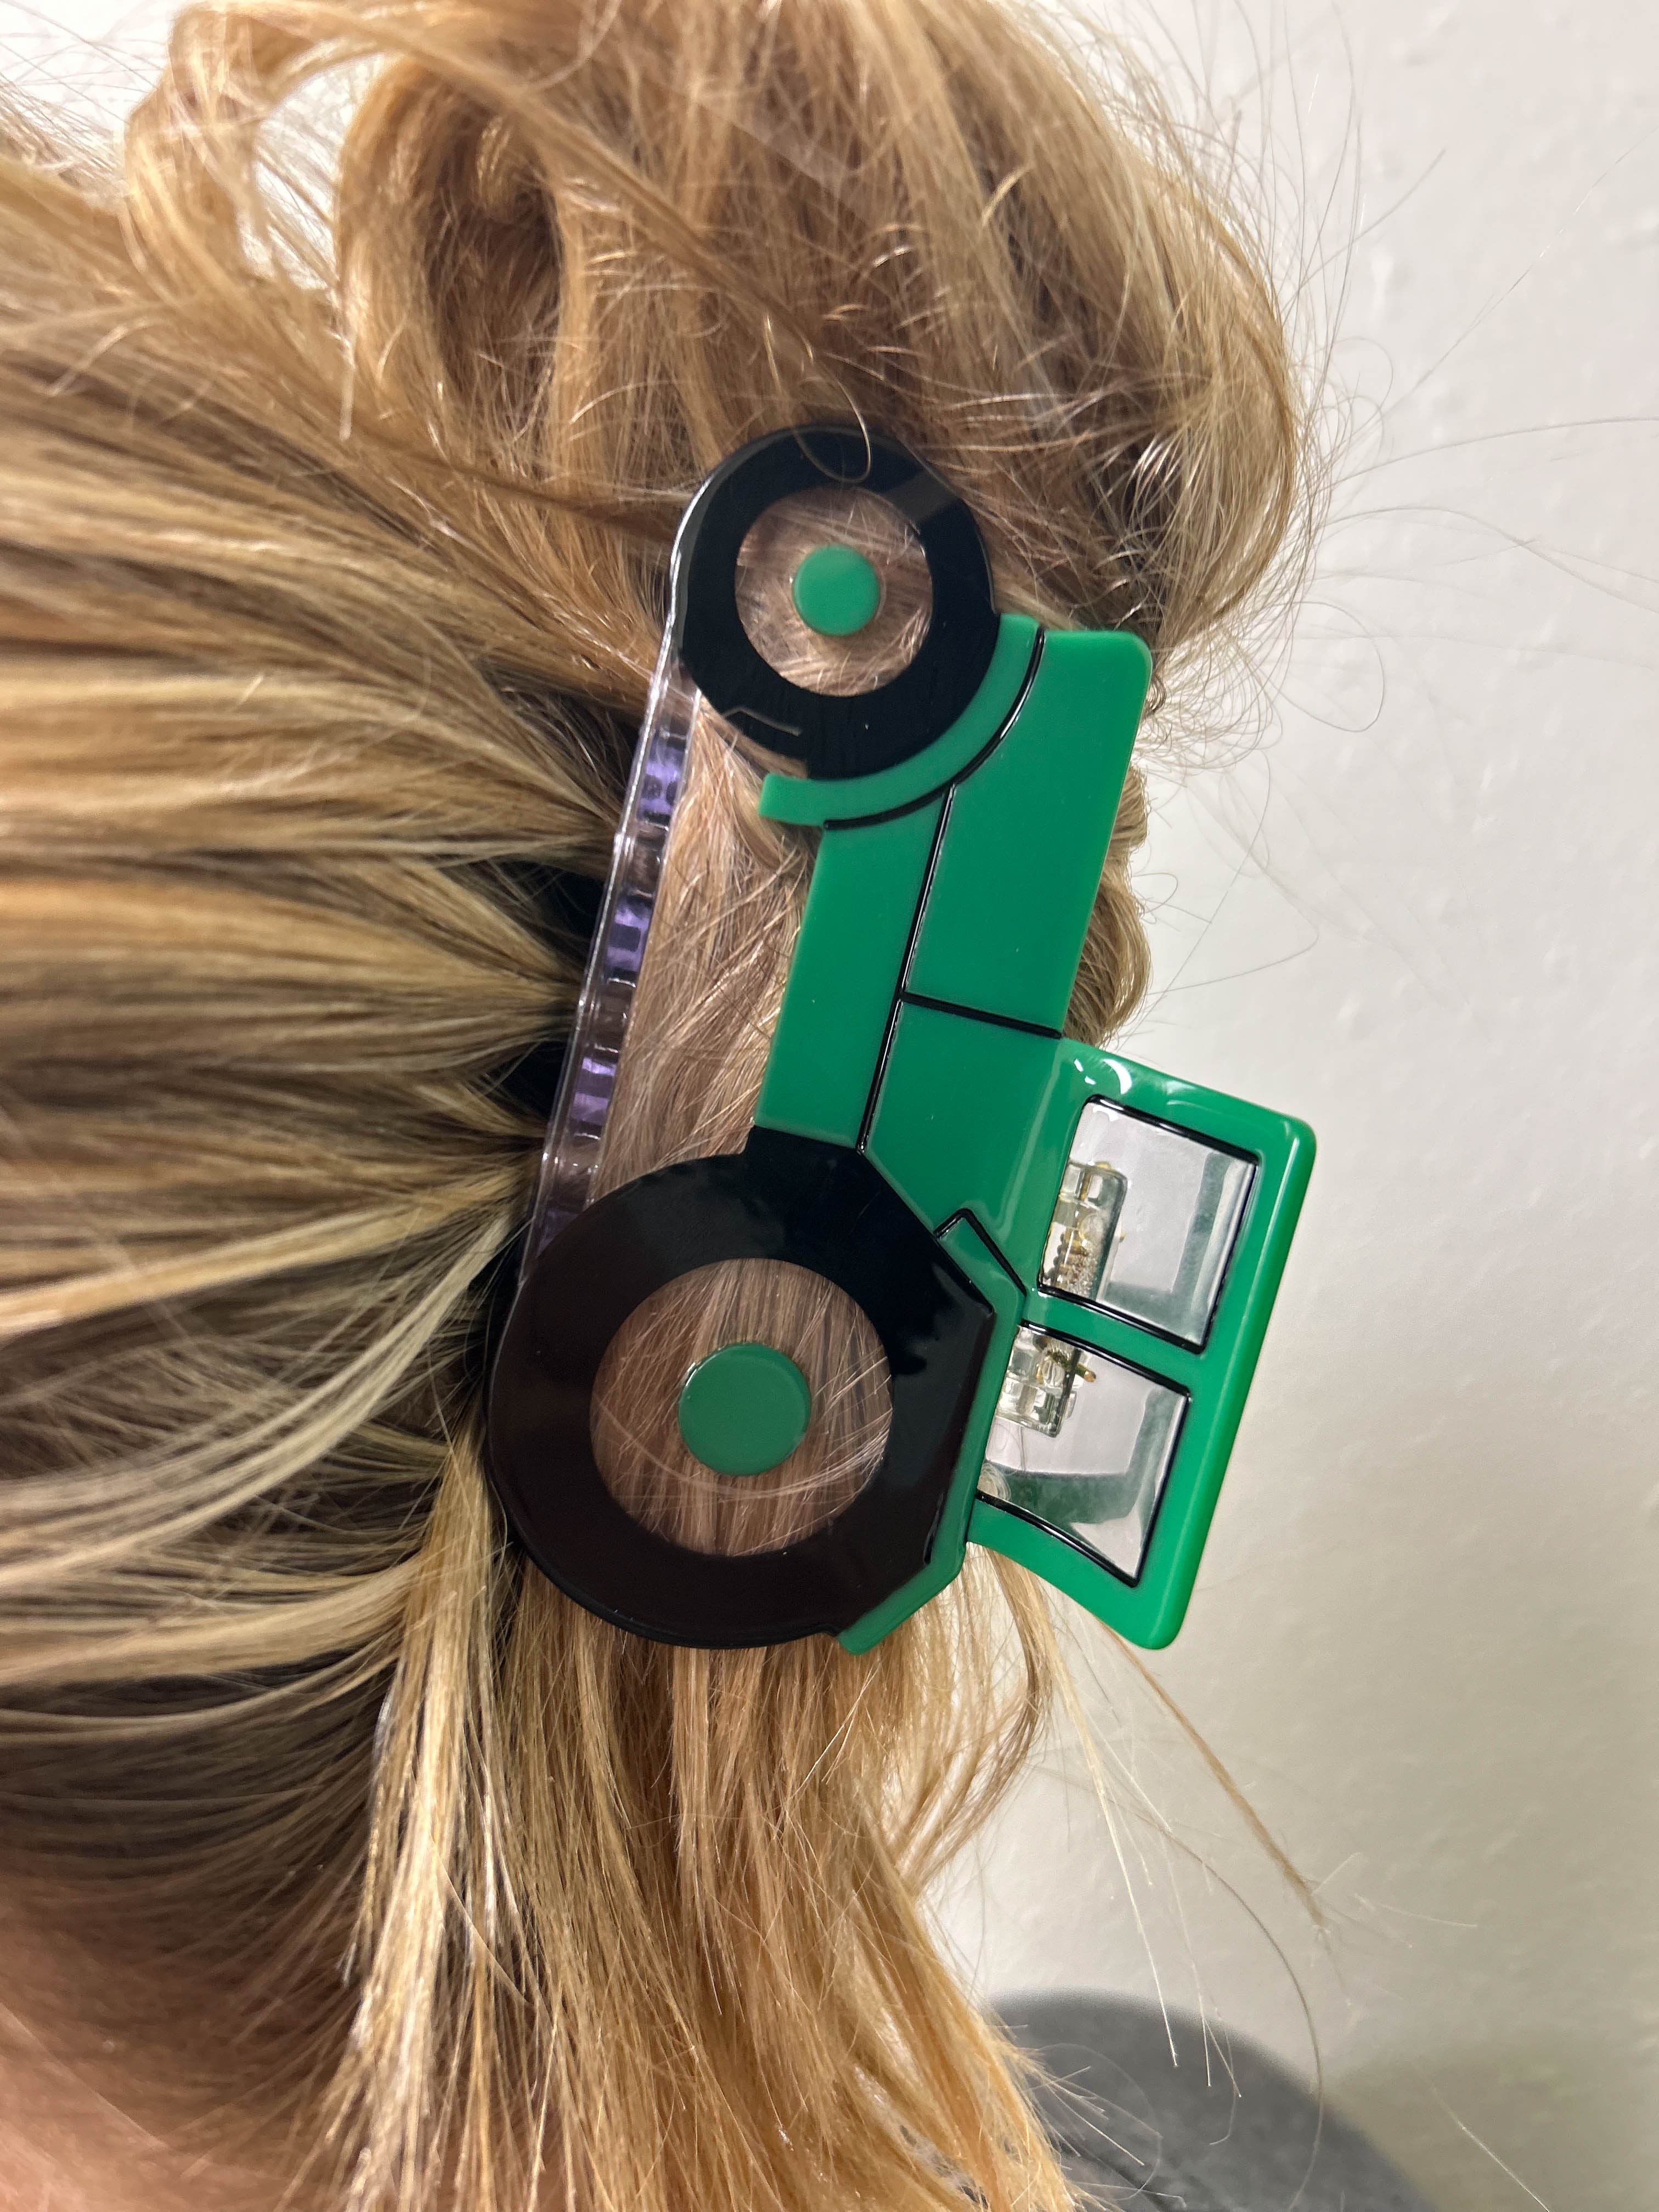 Image of a woman's hair adorned with a Green Tractor Hair Clip